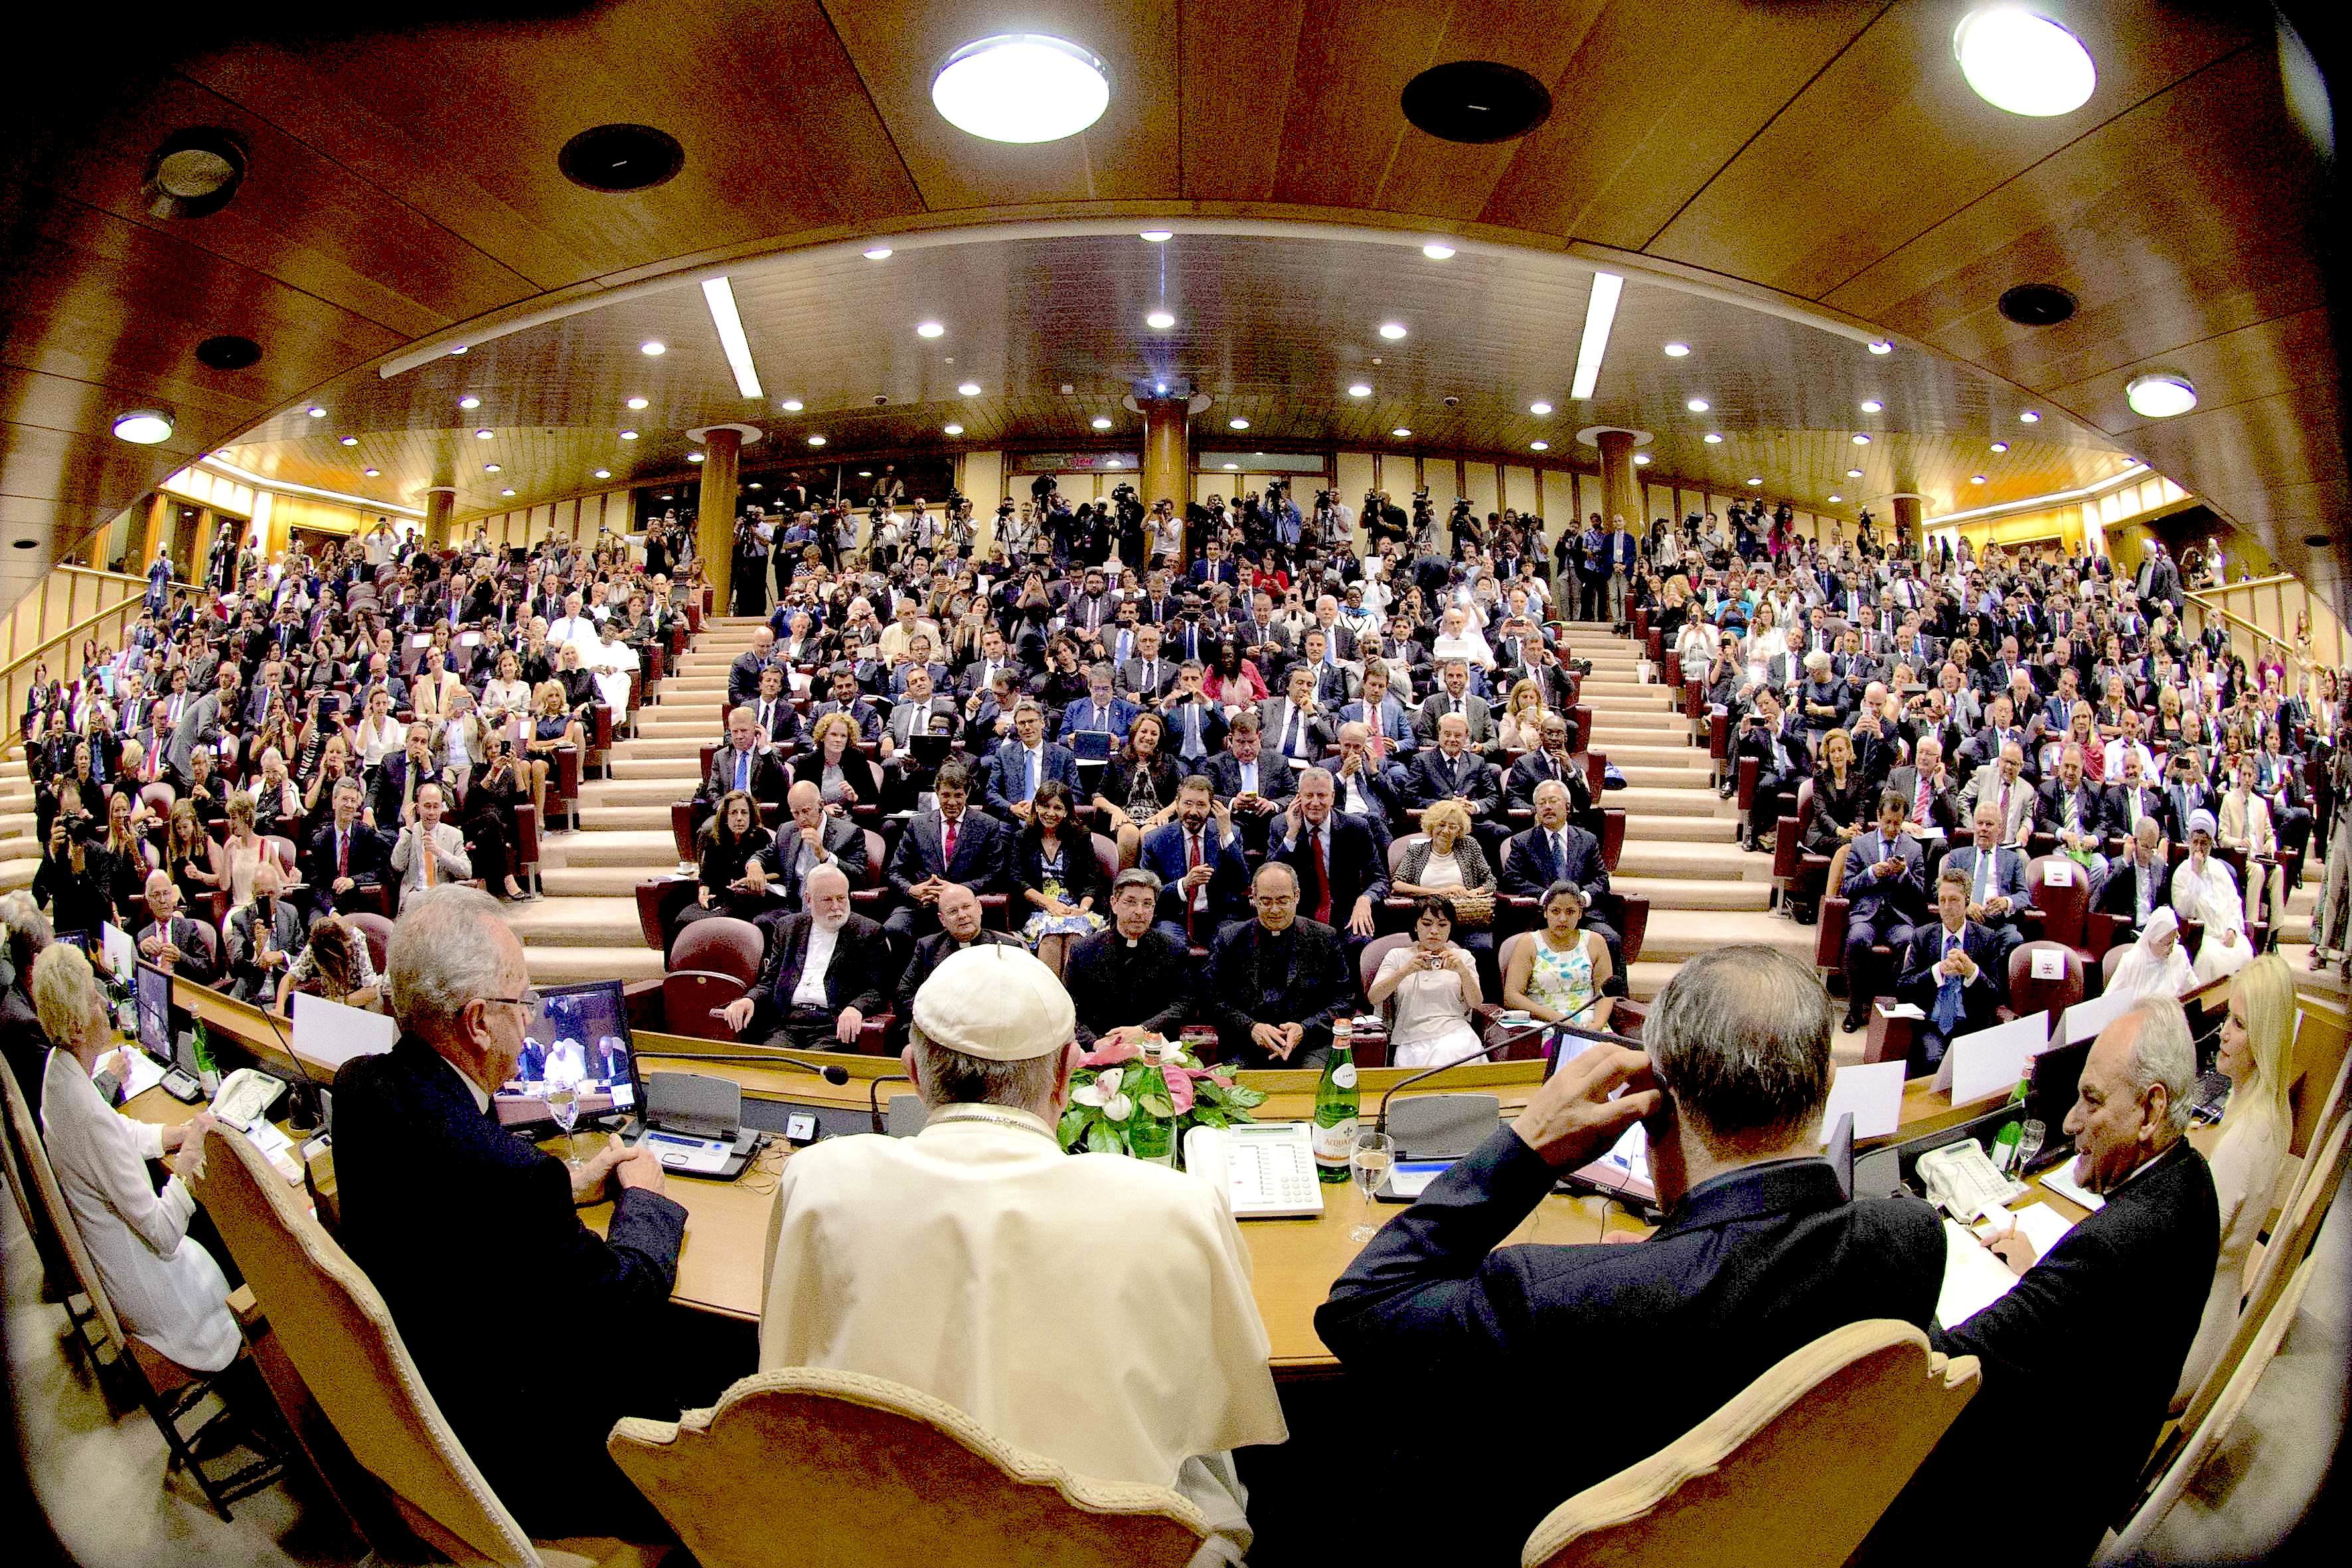 Pope Francis speaking with de mayors of the world in the summit in the Sinodo room. 21 july 2015